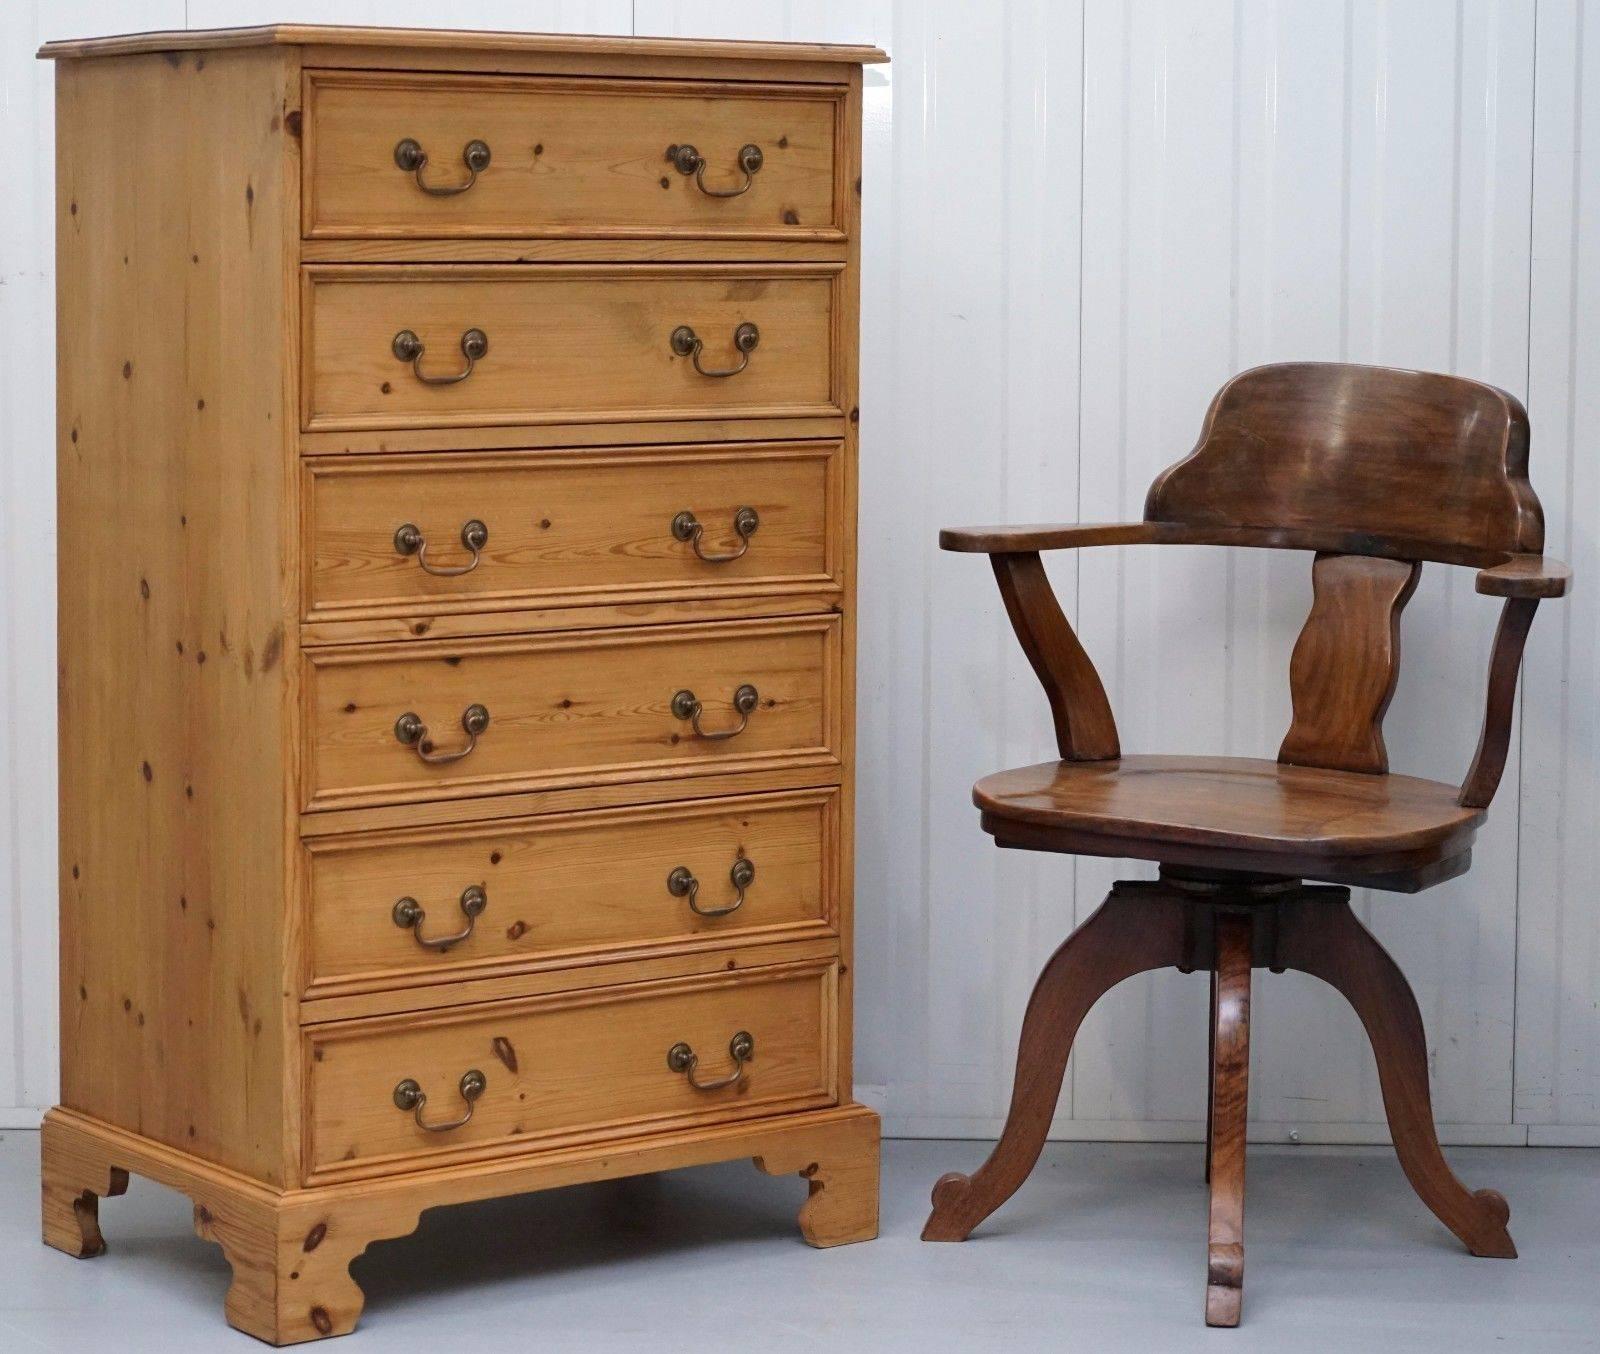 We are delighted to offer for sale this really quite lovely and large solid farmhouse country pine tallboy bank of drawers with swan neck handles

Very rare to find with these dimensions, the drawers are each large and generous, usually, the